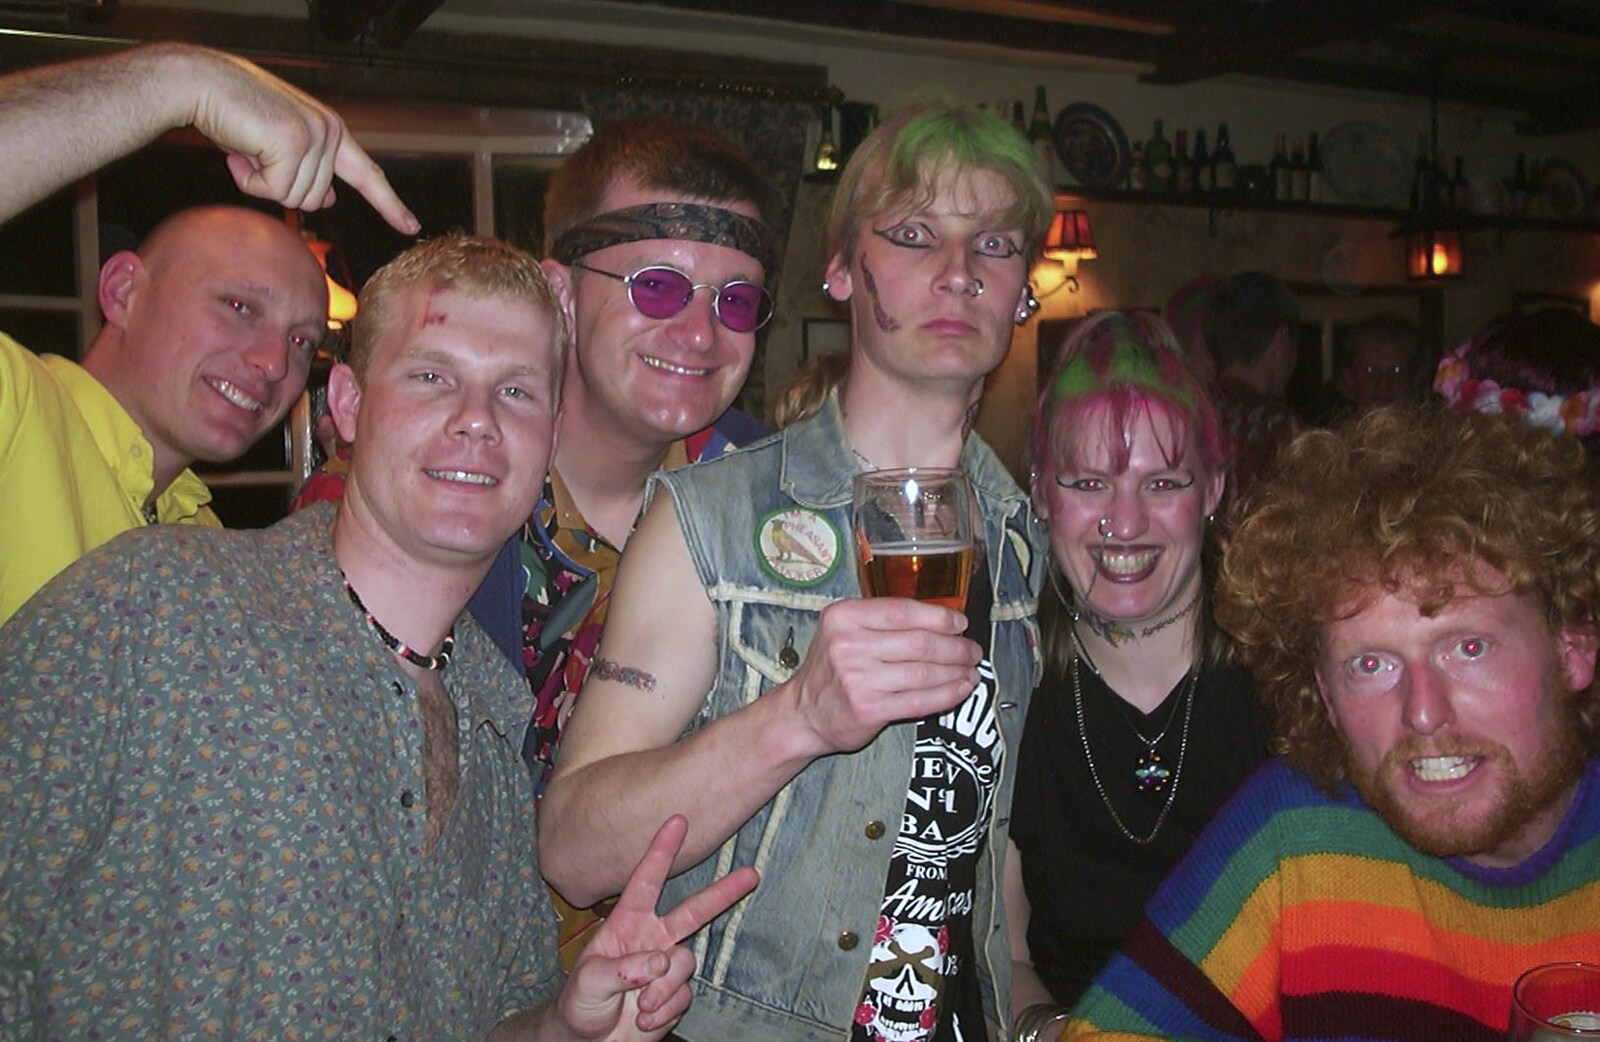 Sue and DH's 30th and 40th Party, The Swan, Suffolk - 18th March 2002: Nosher joins in with the gang